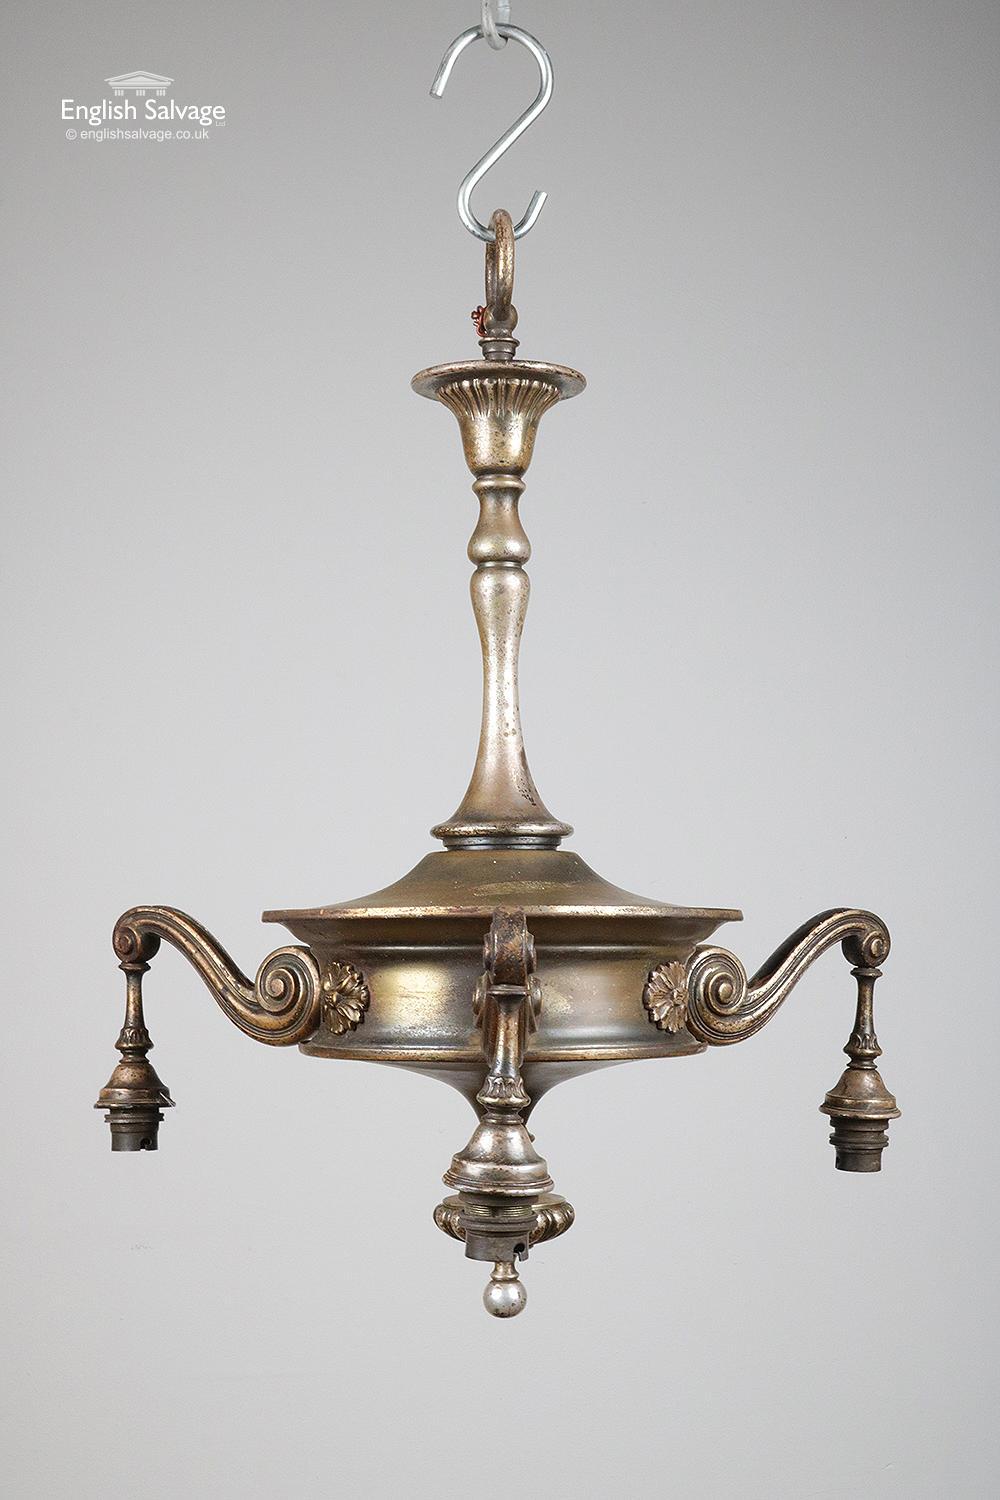 Attractive reclaimed three-arm pendant ceiling light. Well made with a decent weight to it. Lovely detailing throughout with scrollwork and floral cartouches. There is some wear and discoloration to the brass as shown in the photos. Standard bayonet